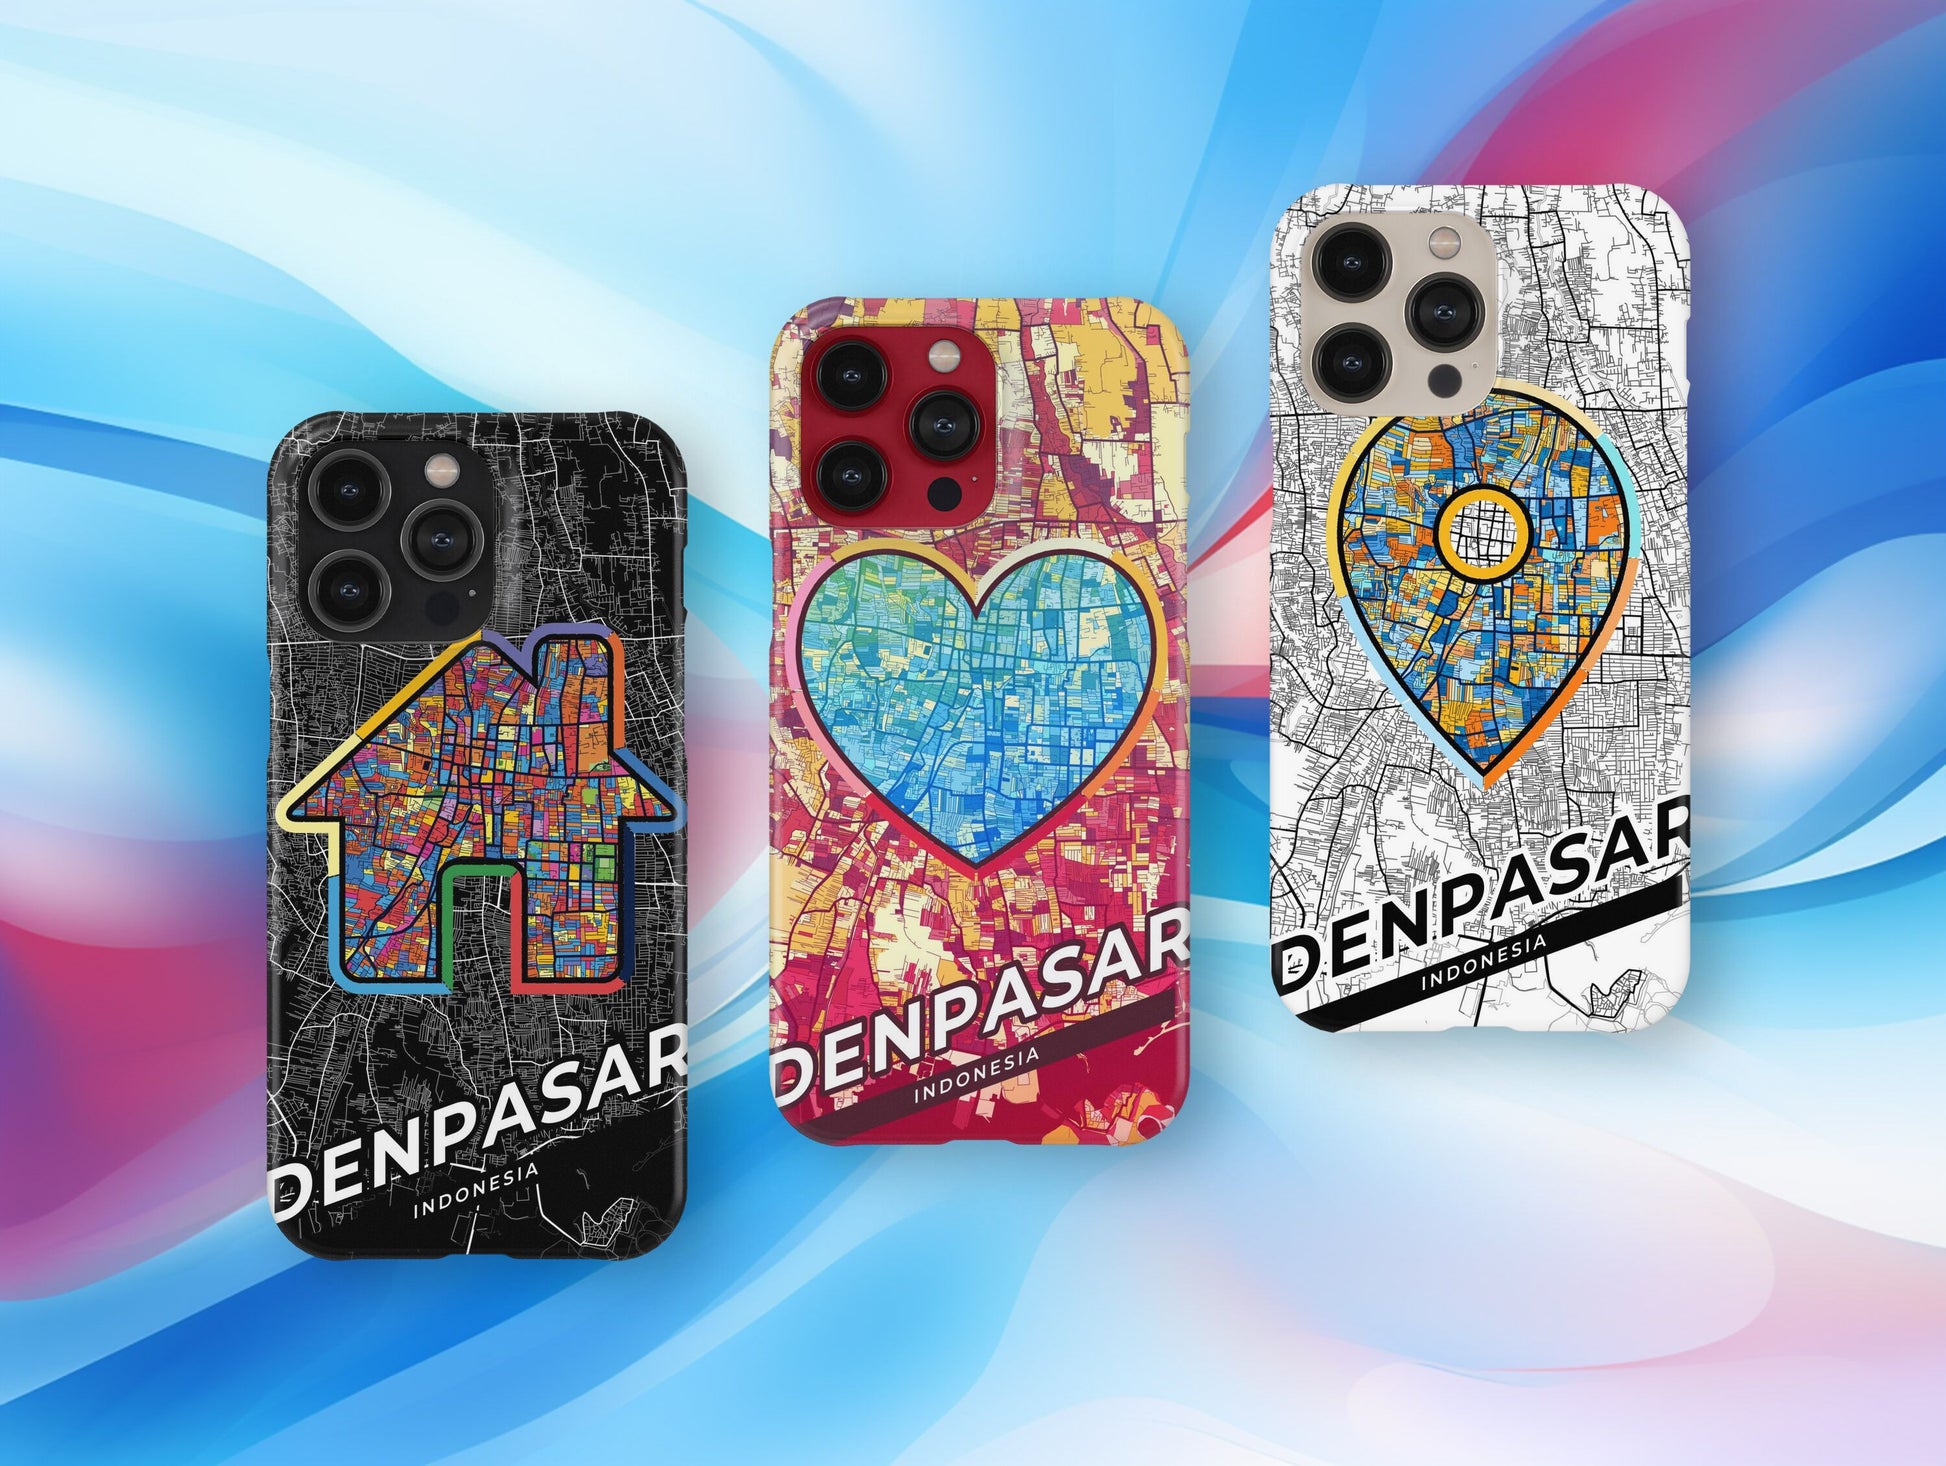 Denpasar Indonesia slim phone case with colorful icon. Birthday, wedding or housewarming gift. Couple match cases.